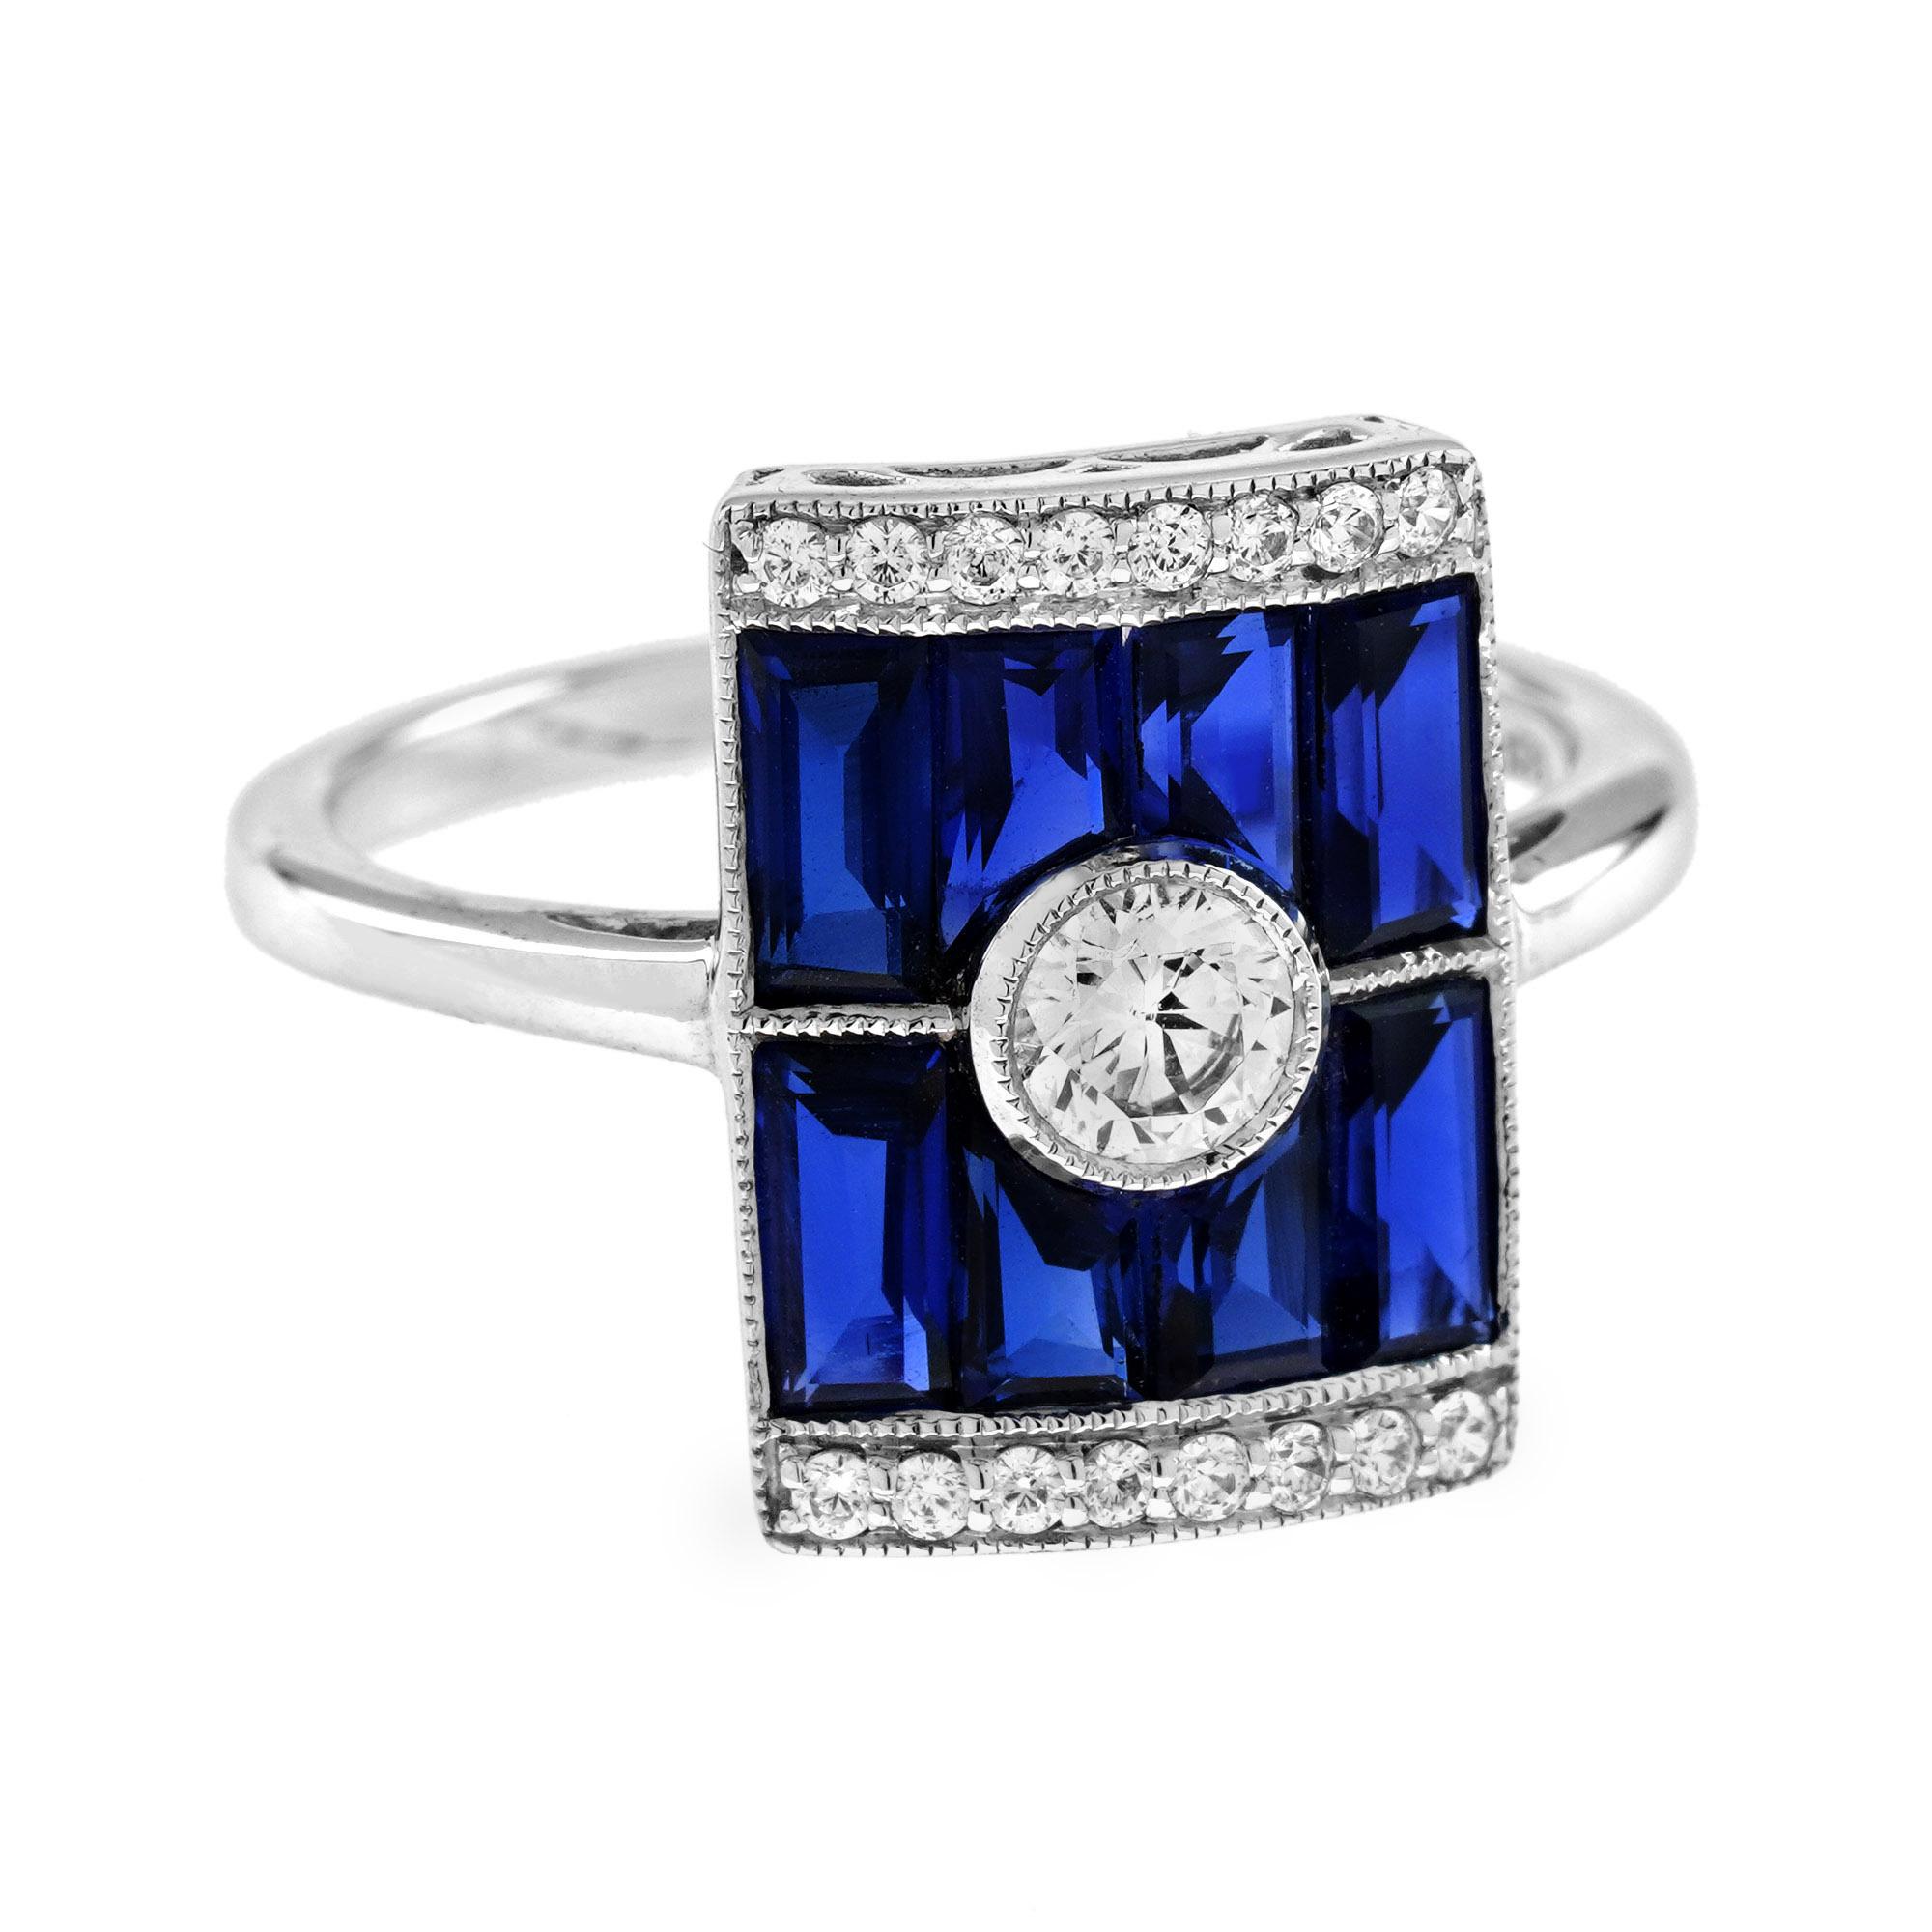 Round Cut Diamond and Blue Sapphire Art Deco Style Rectangular Ring in 18K White Gold For Sale